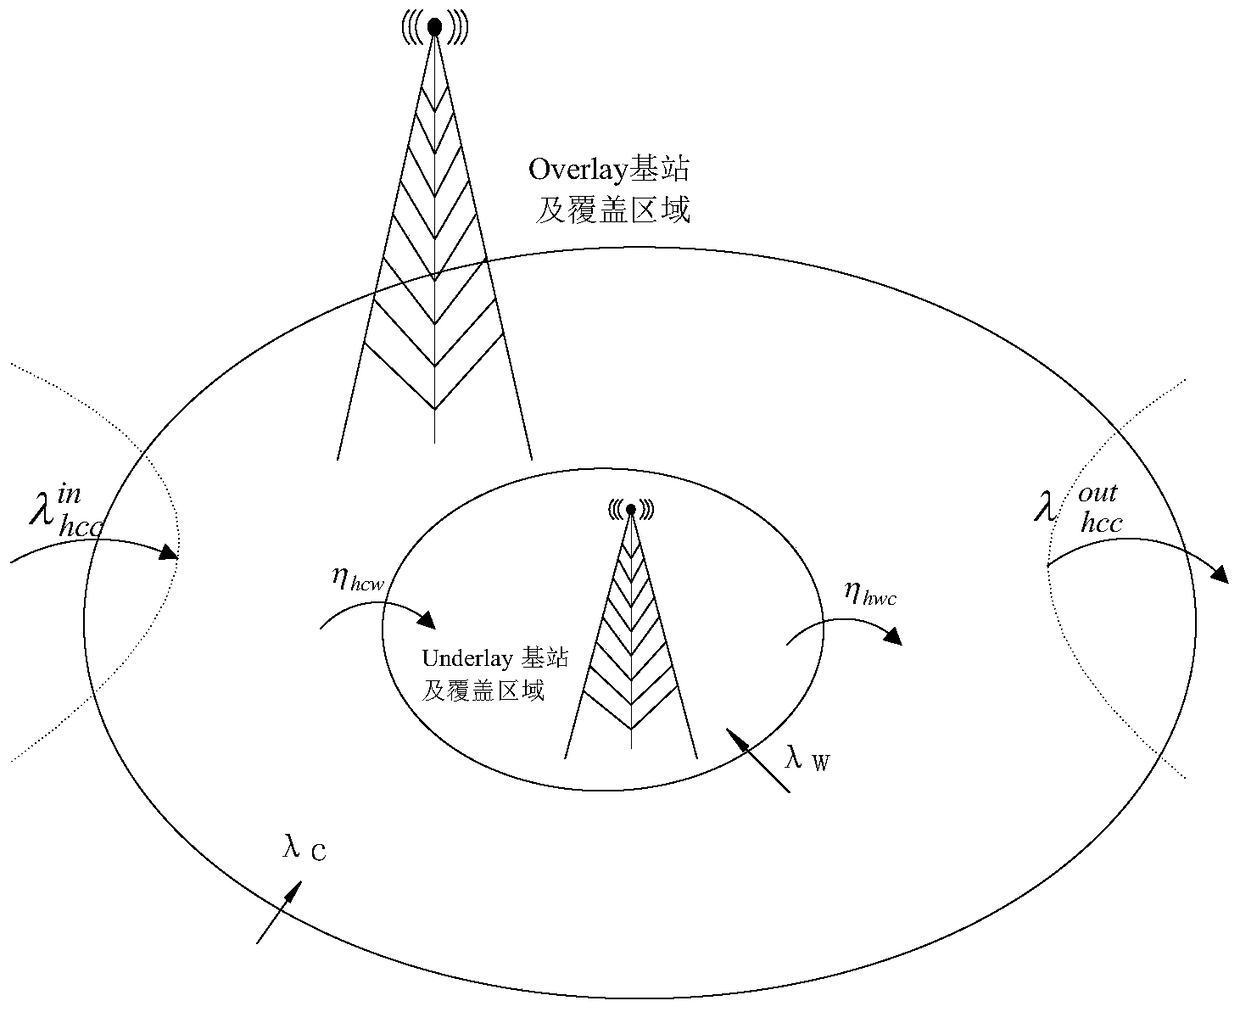 A Joint Admission Control Method for Heterogeneous Wireless Networks